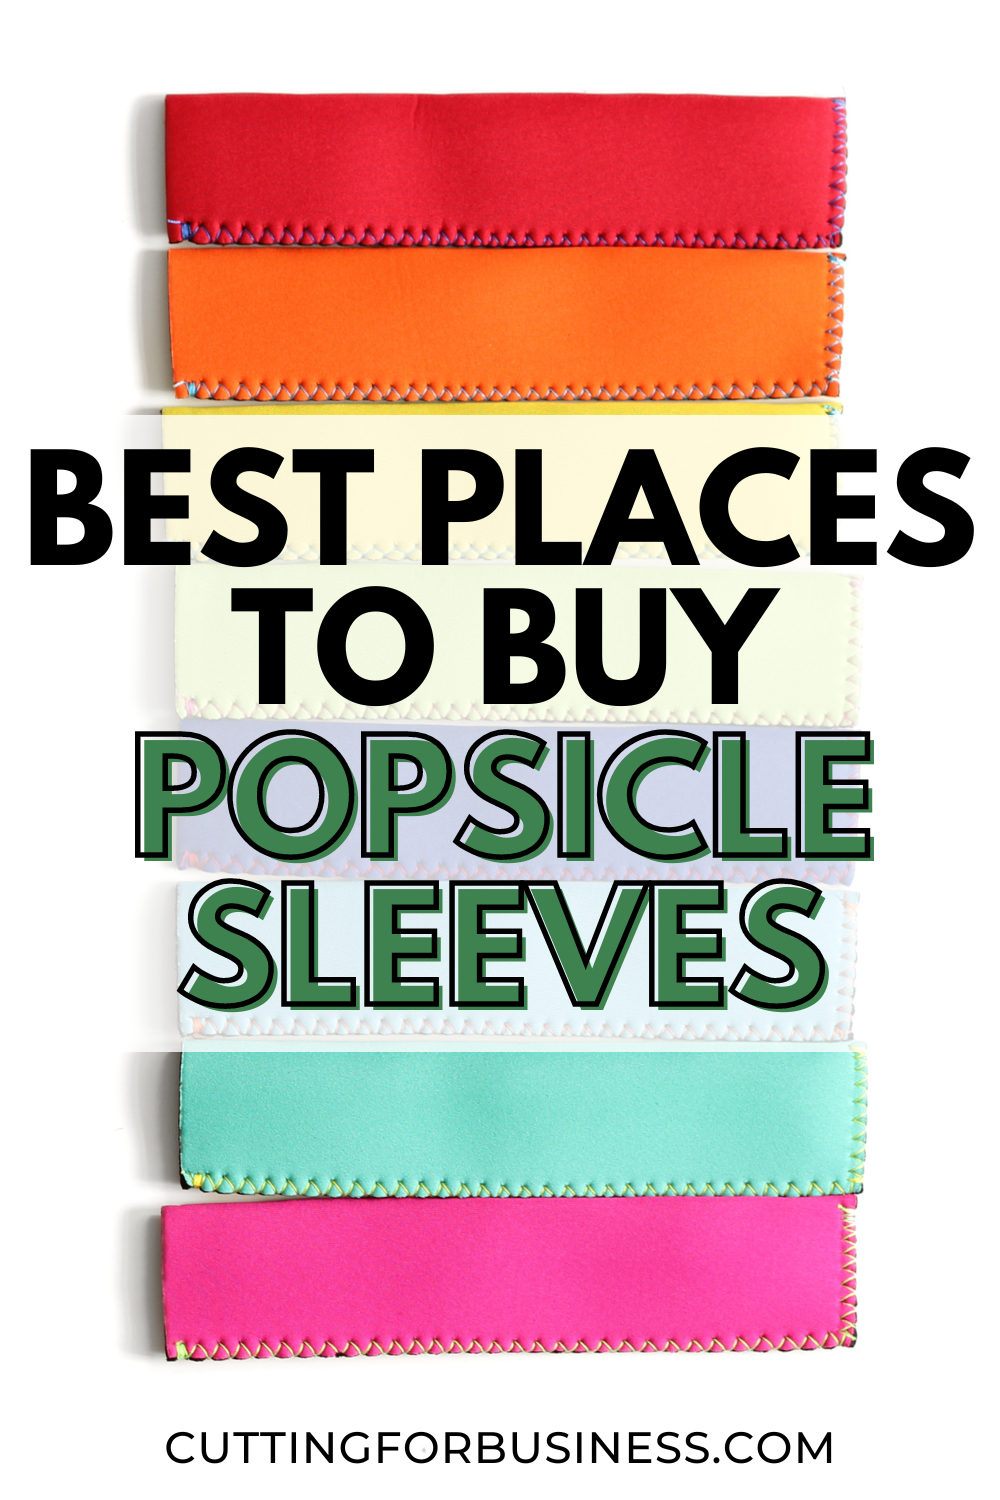 Best Places to Buy Popsicle Sleeves - cuttingforbusiness.com.